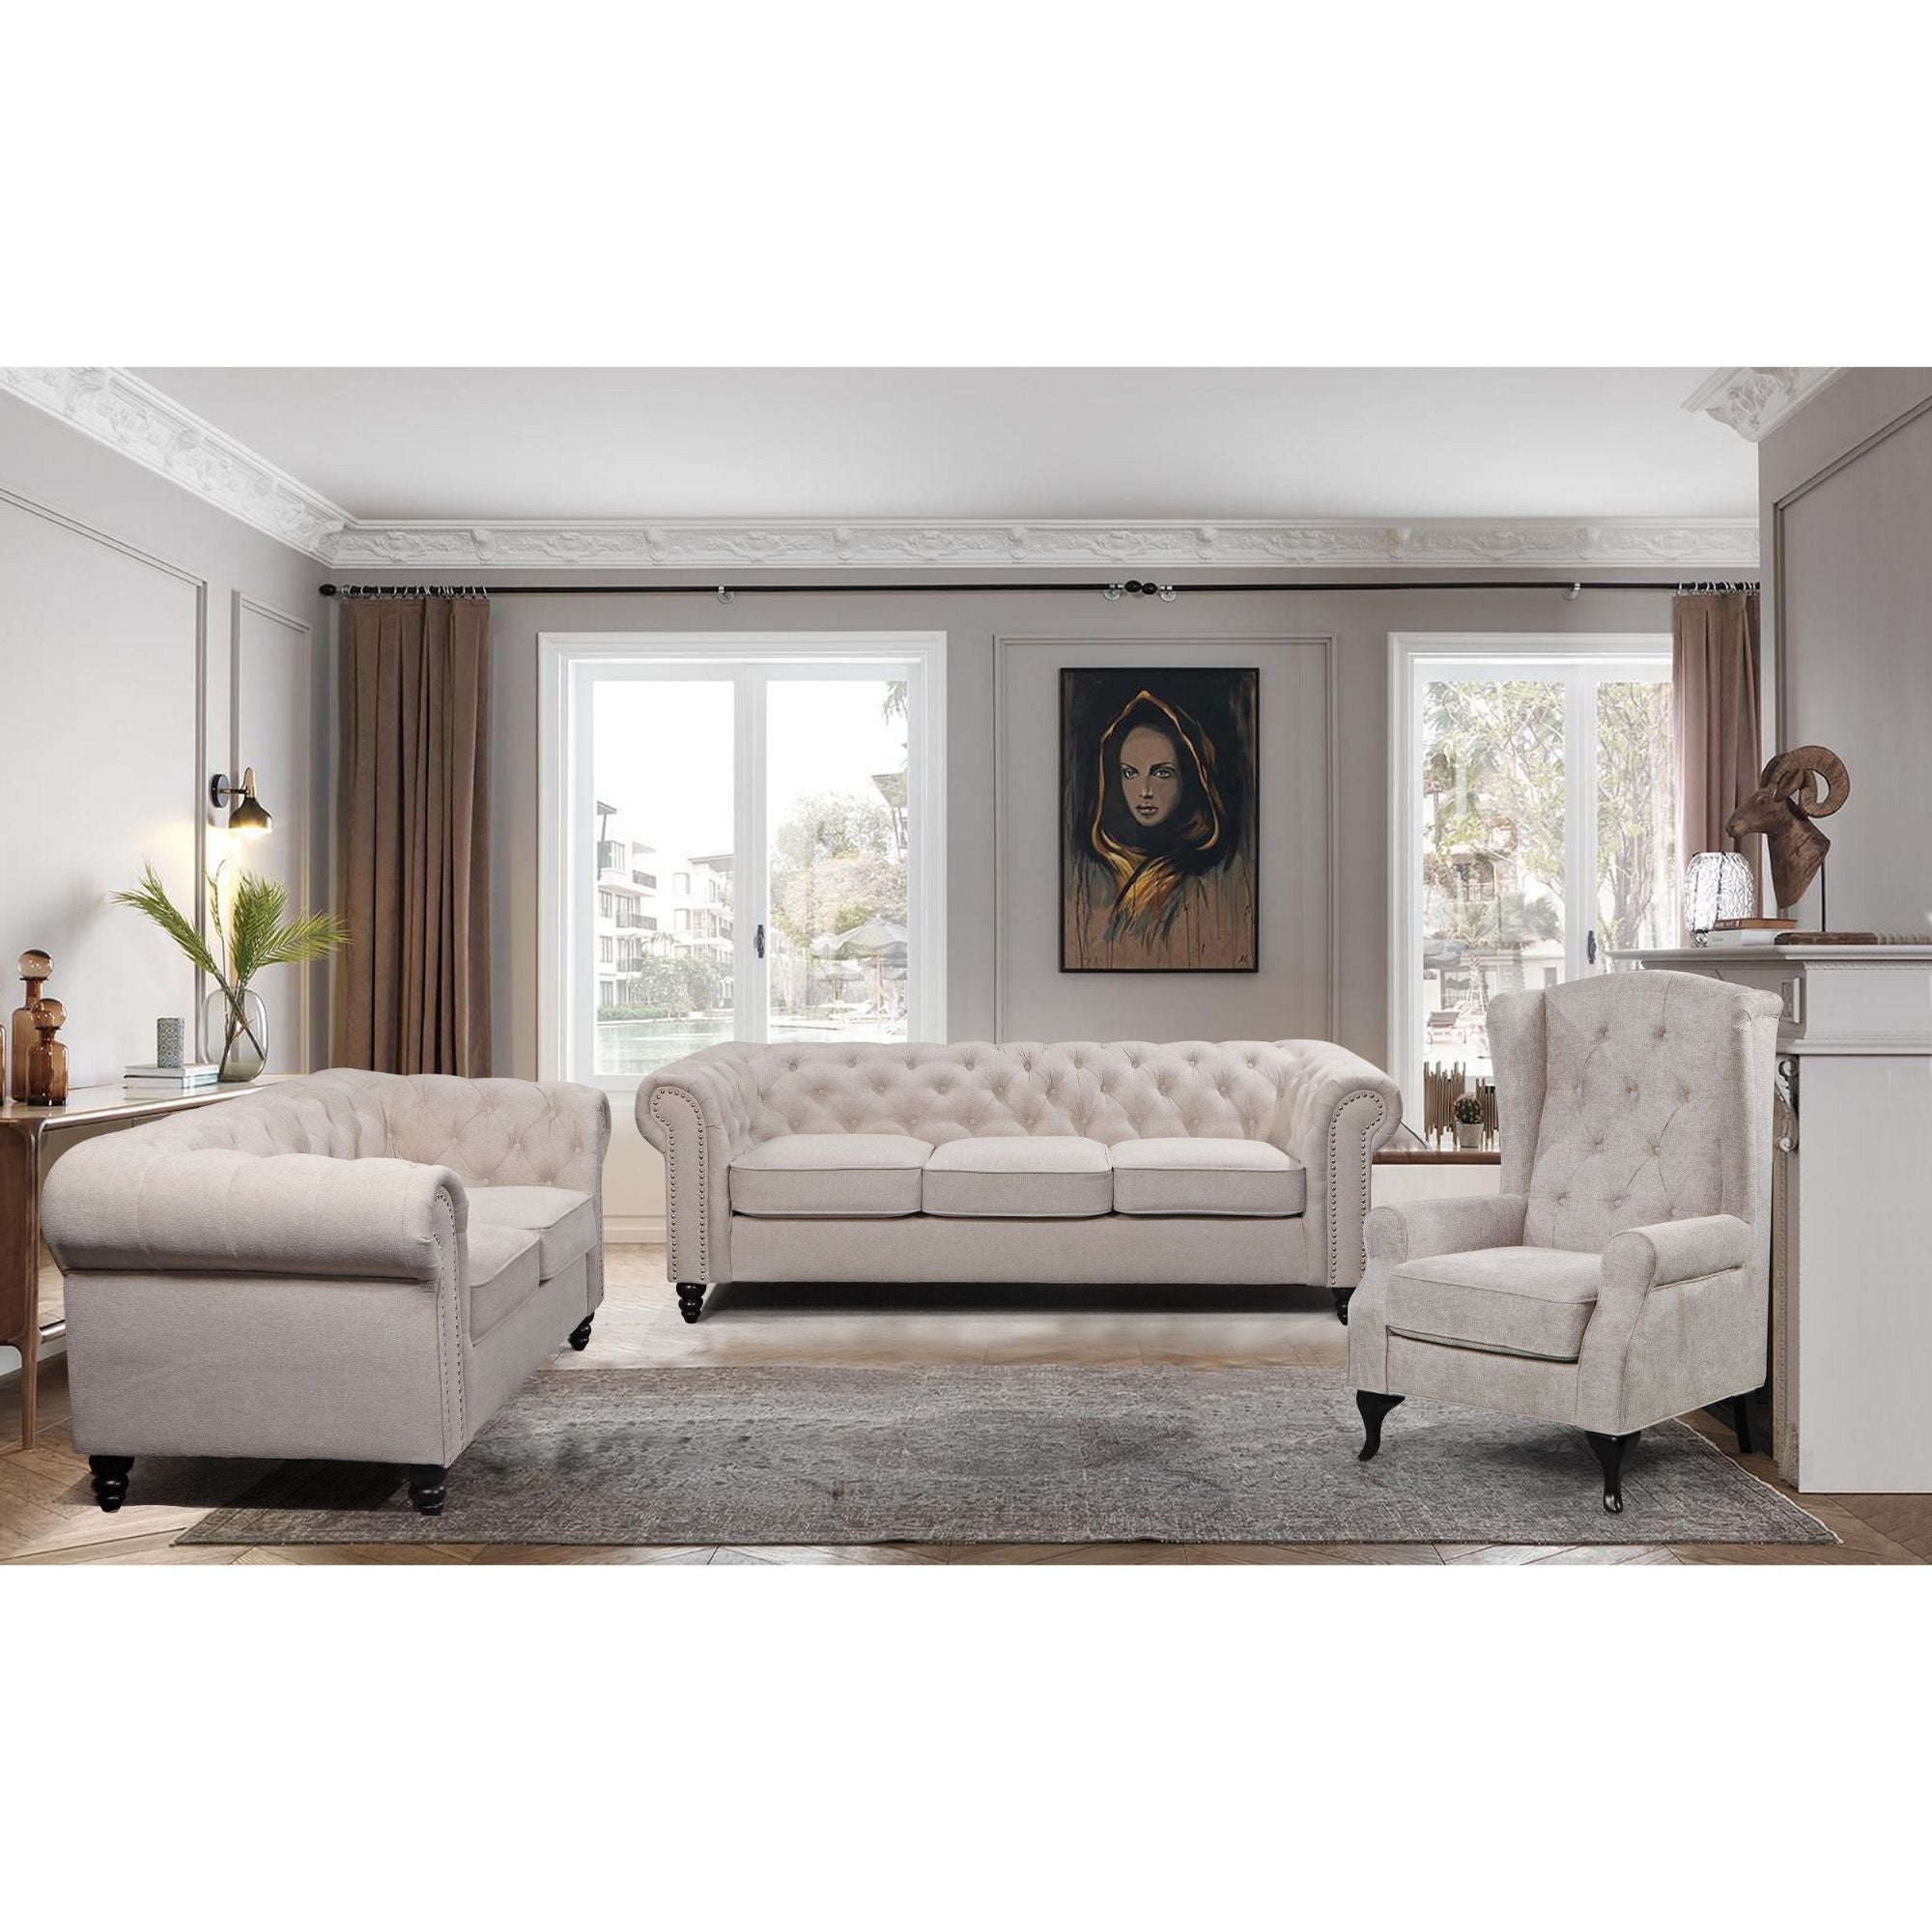 Mellowly 3 + 2 Seater Sofa Fabric Uplholstered Chesterfield Lounge Couch - Beige